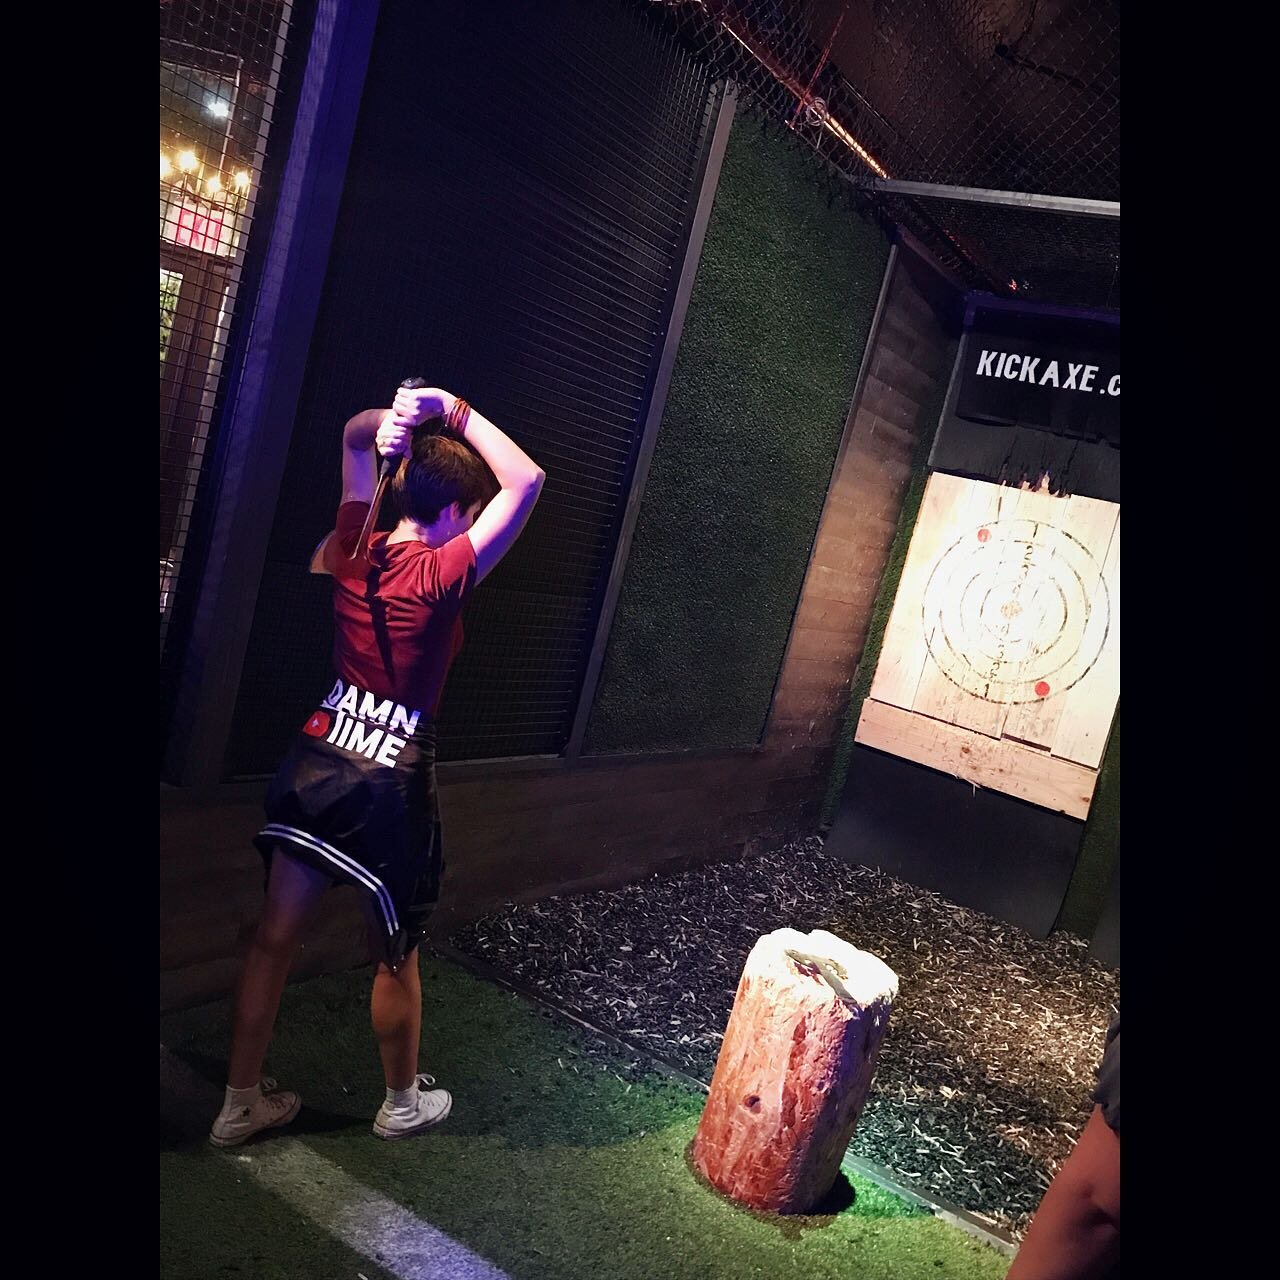 She&rsquo;s fire. 🔥🔥🔥
&hellip;
@standby_mc
&hellip;
w/ @apforthat @kickaxethrowing